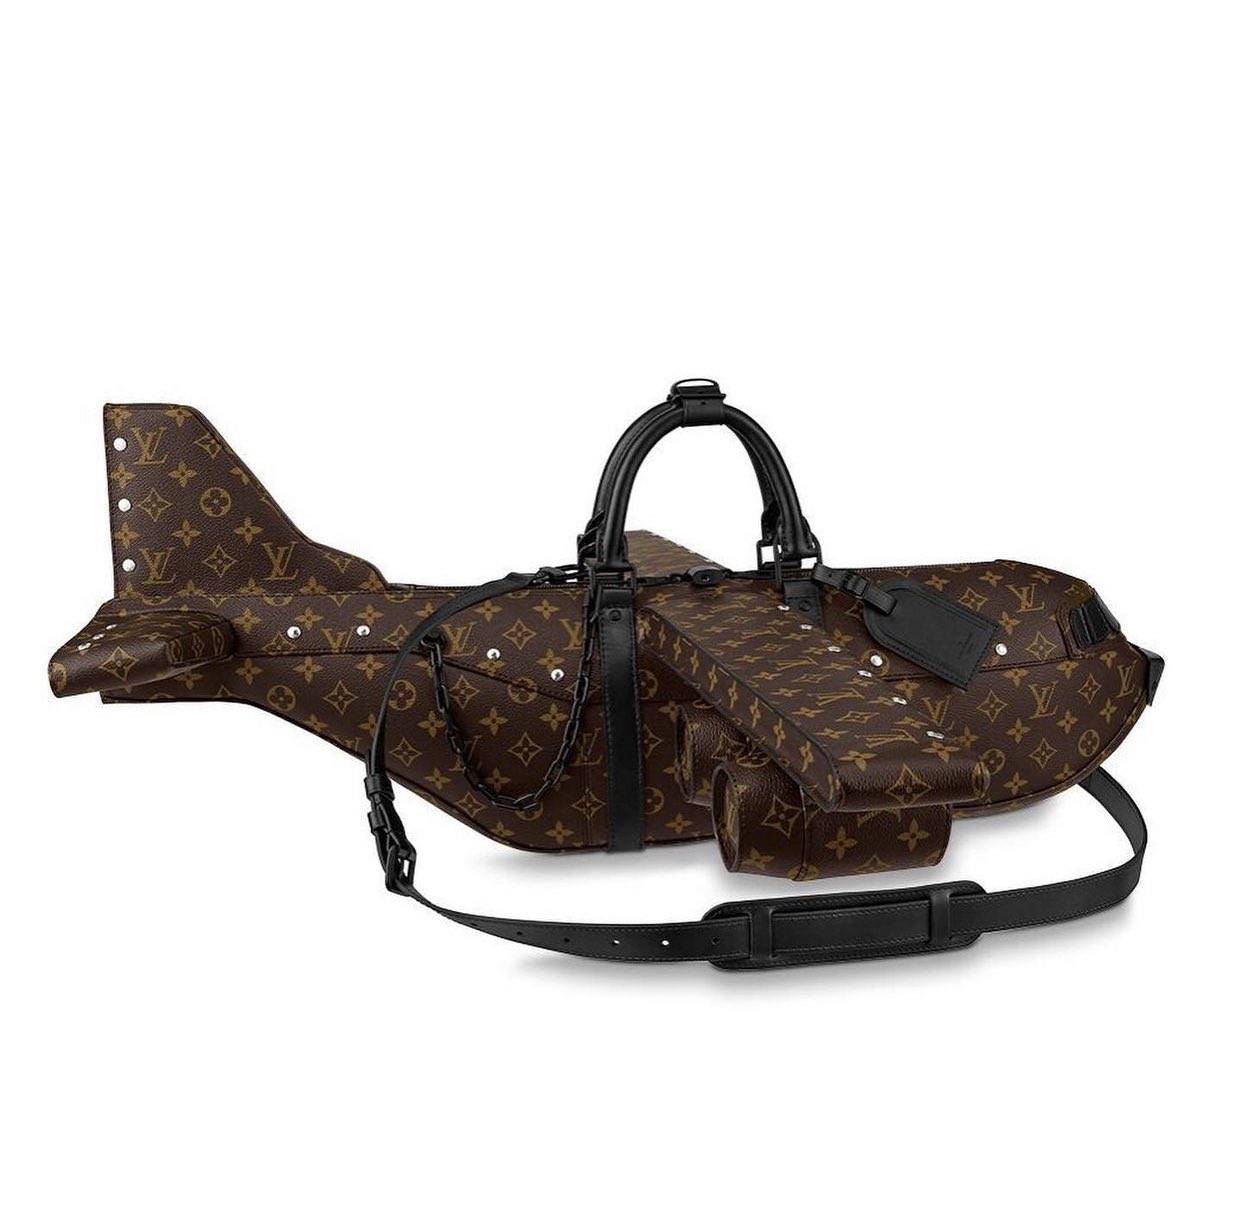 The Whitespace x Louis Vuitton Luggage Set Includes A Snowboard Case